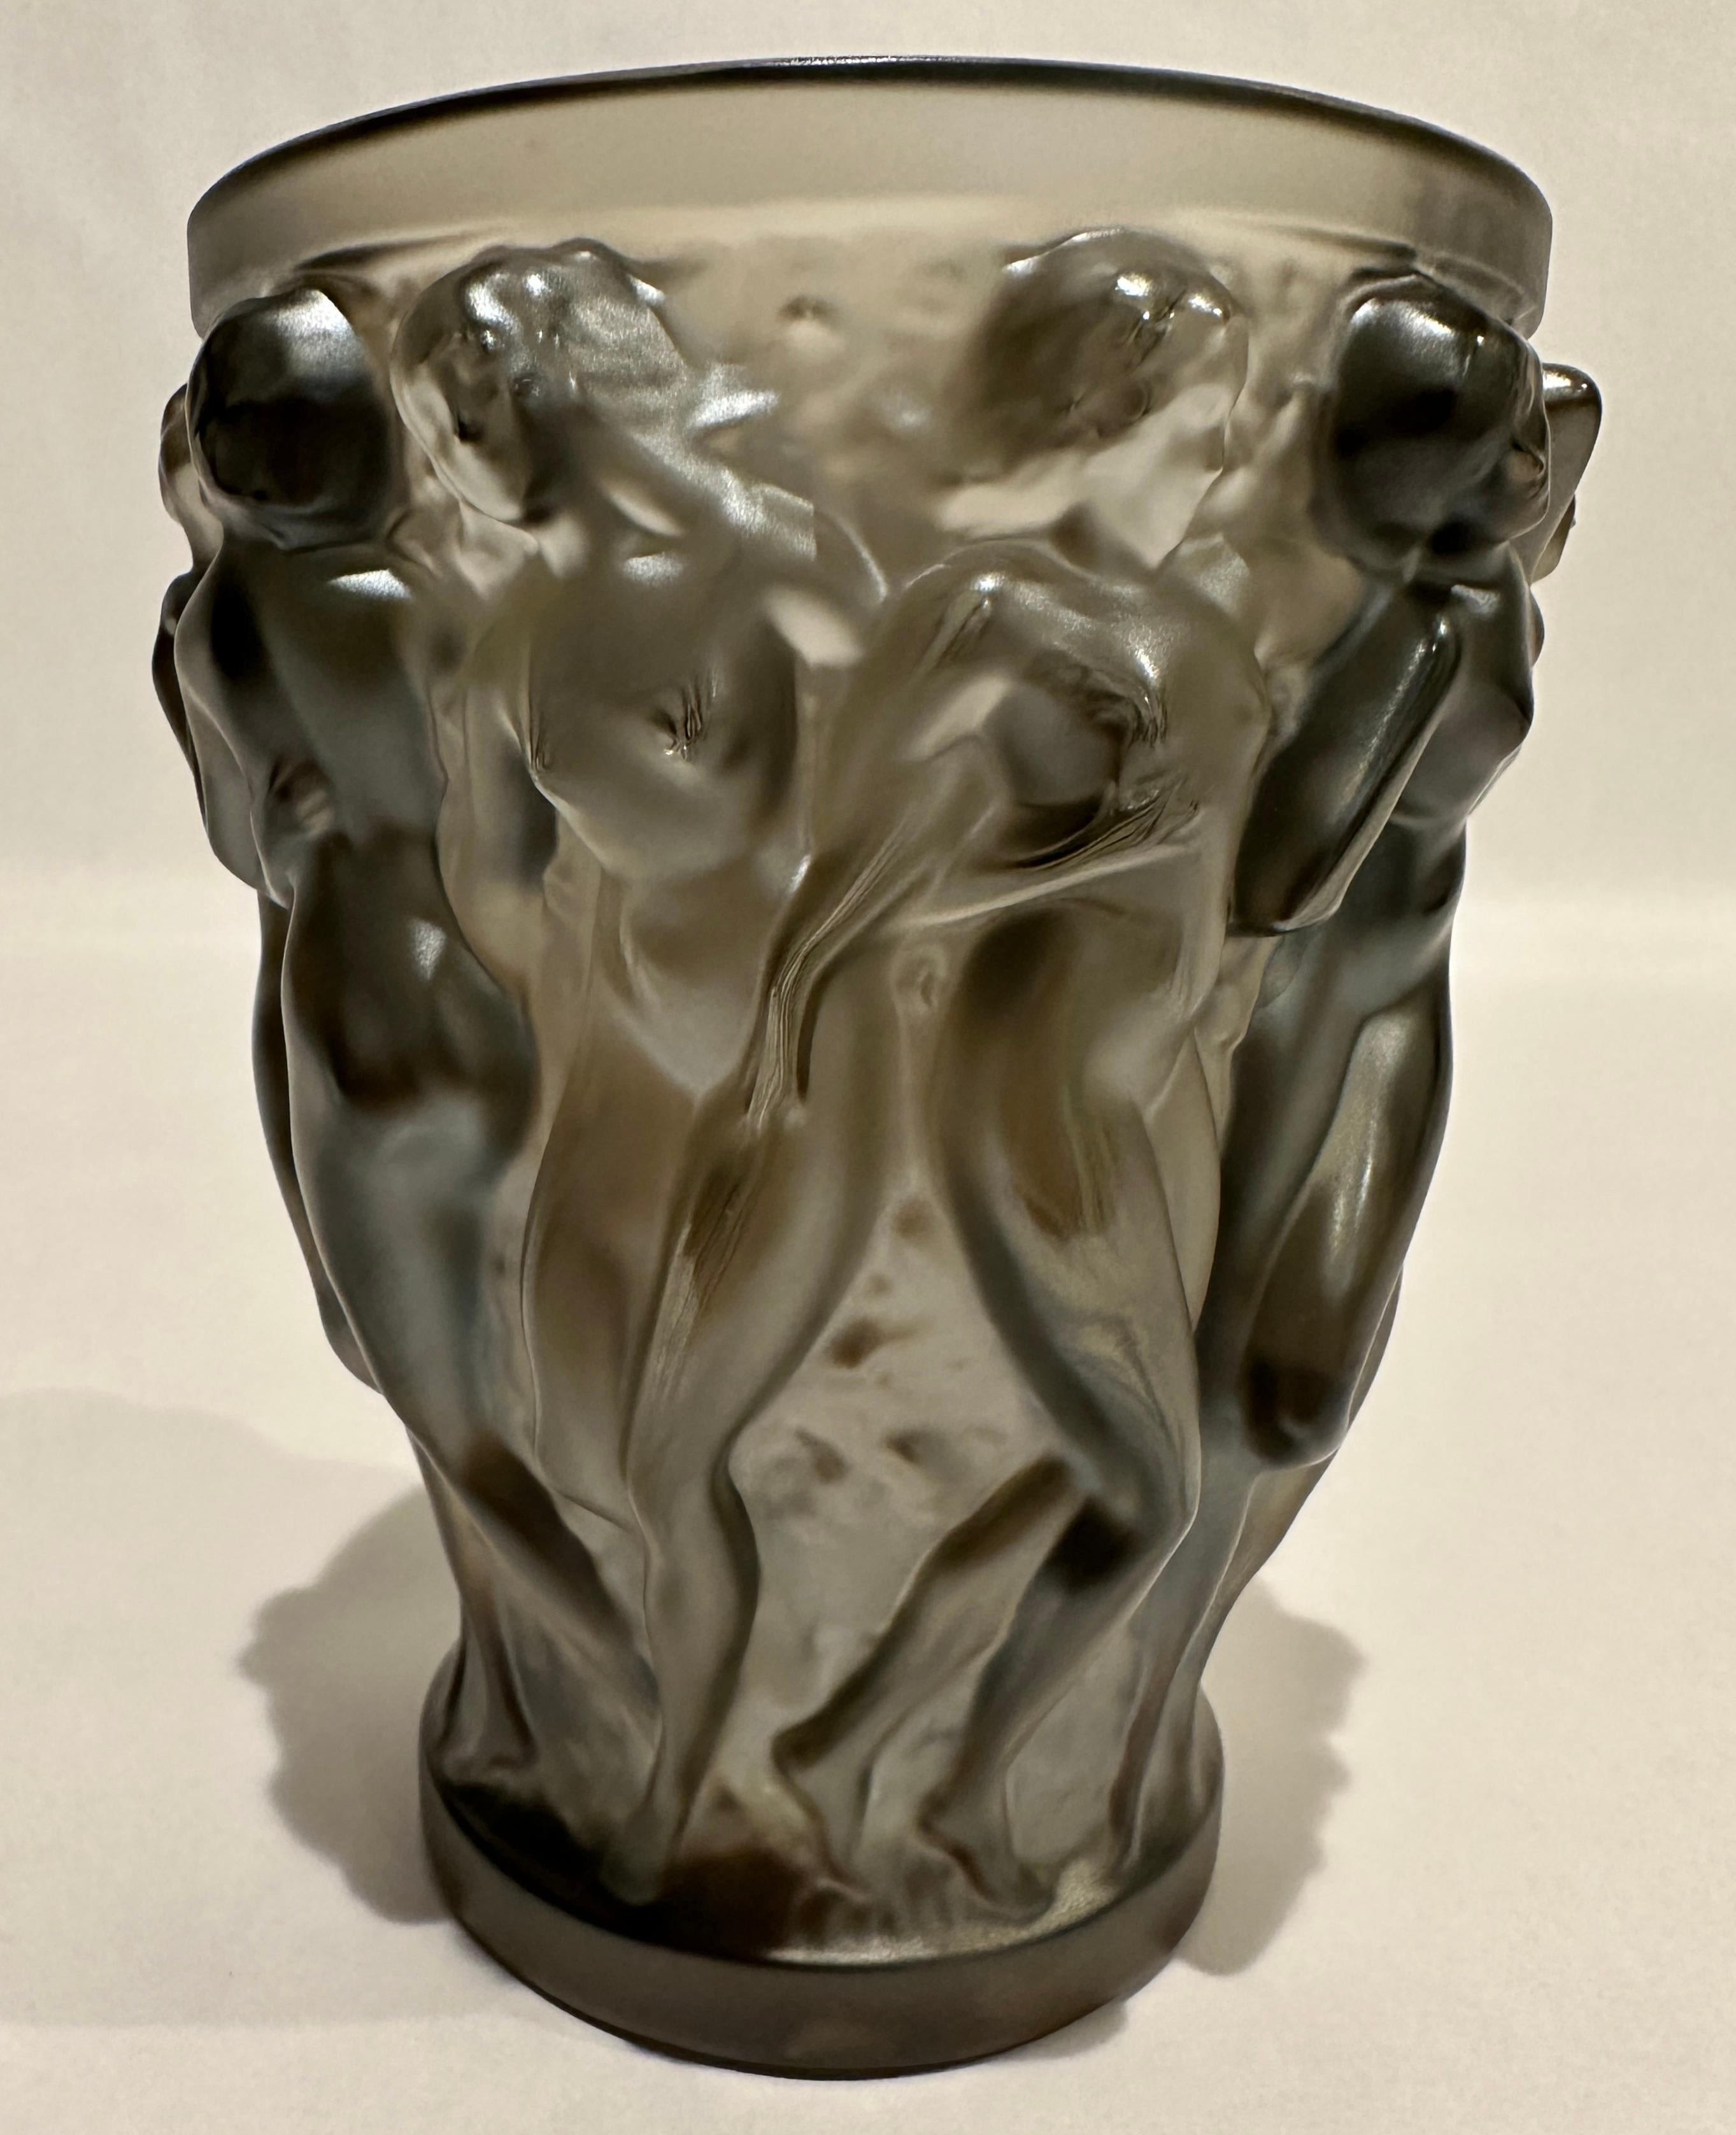 Lalique Bacchantes crystal vase in bronze-tone satin, signed at bottom. Original clear Lalique label.

In 1927, Rene Lalique's boundless imagination and creative genius lead to the creation of the Bacchantes Vase. As a splendid insolent and a